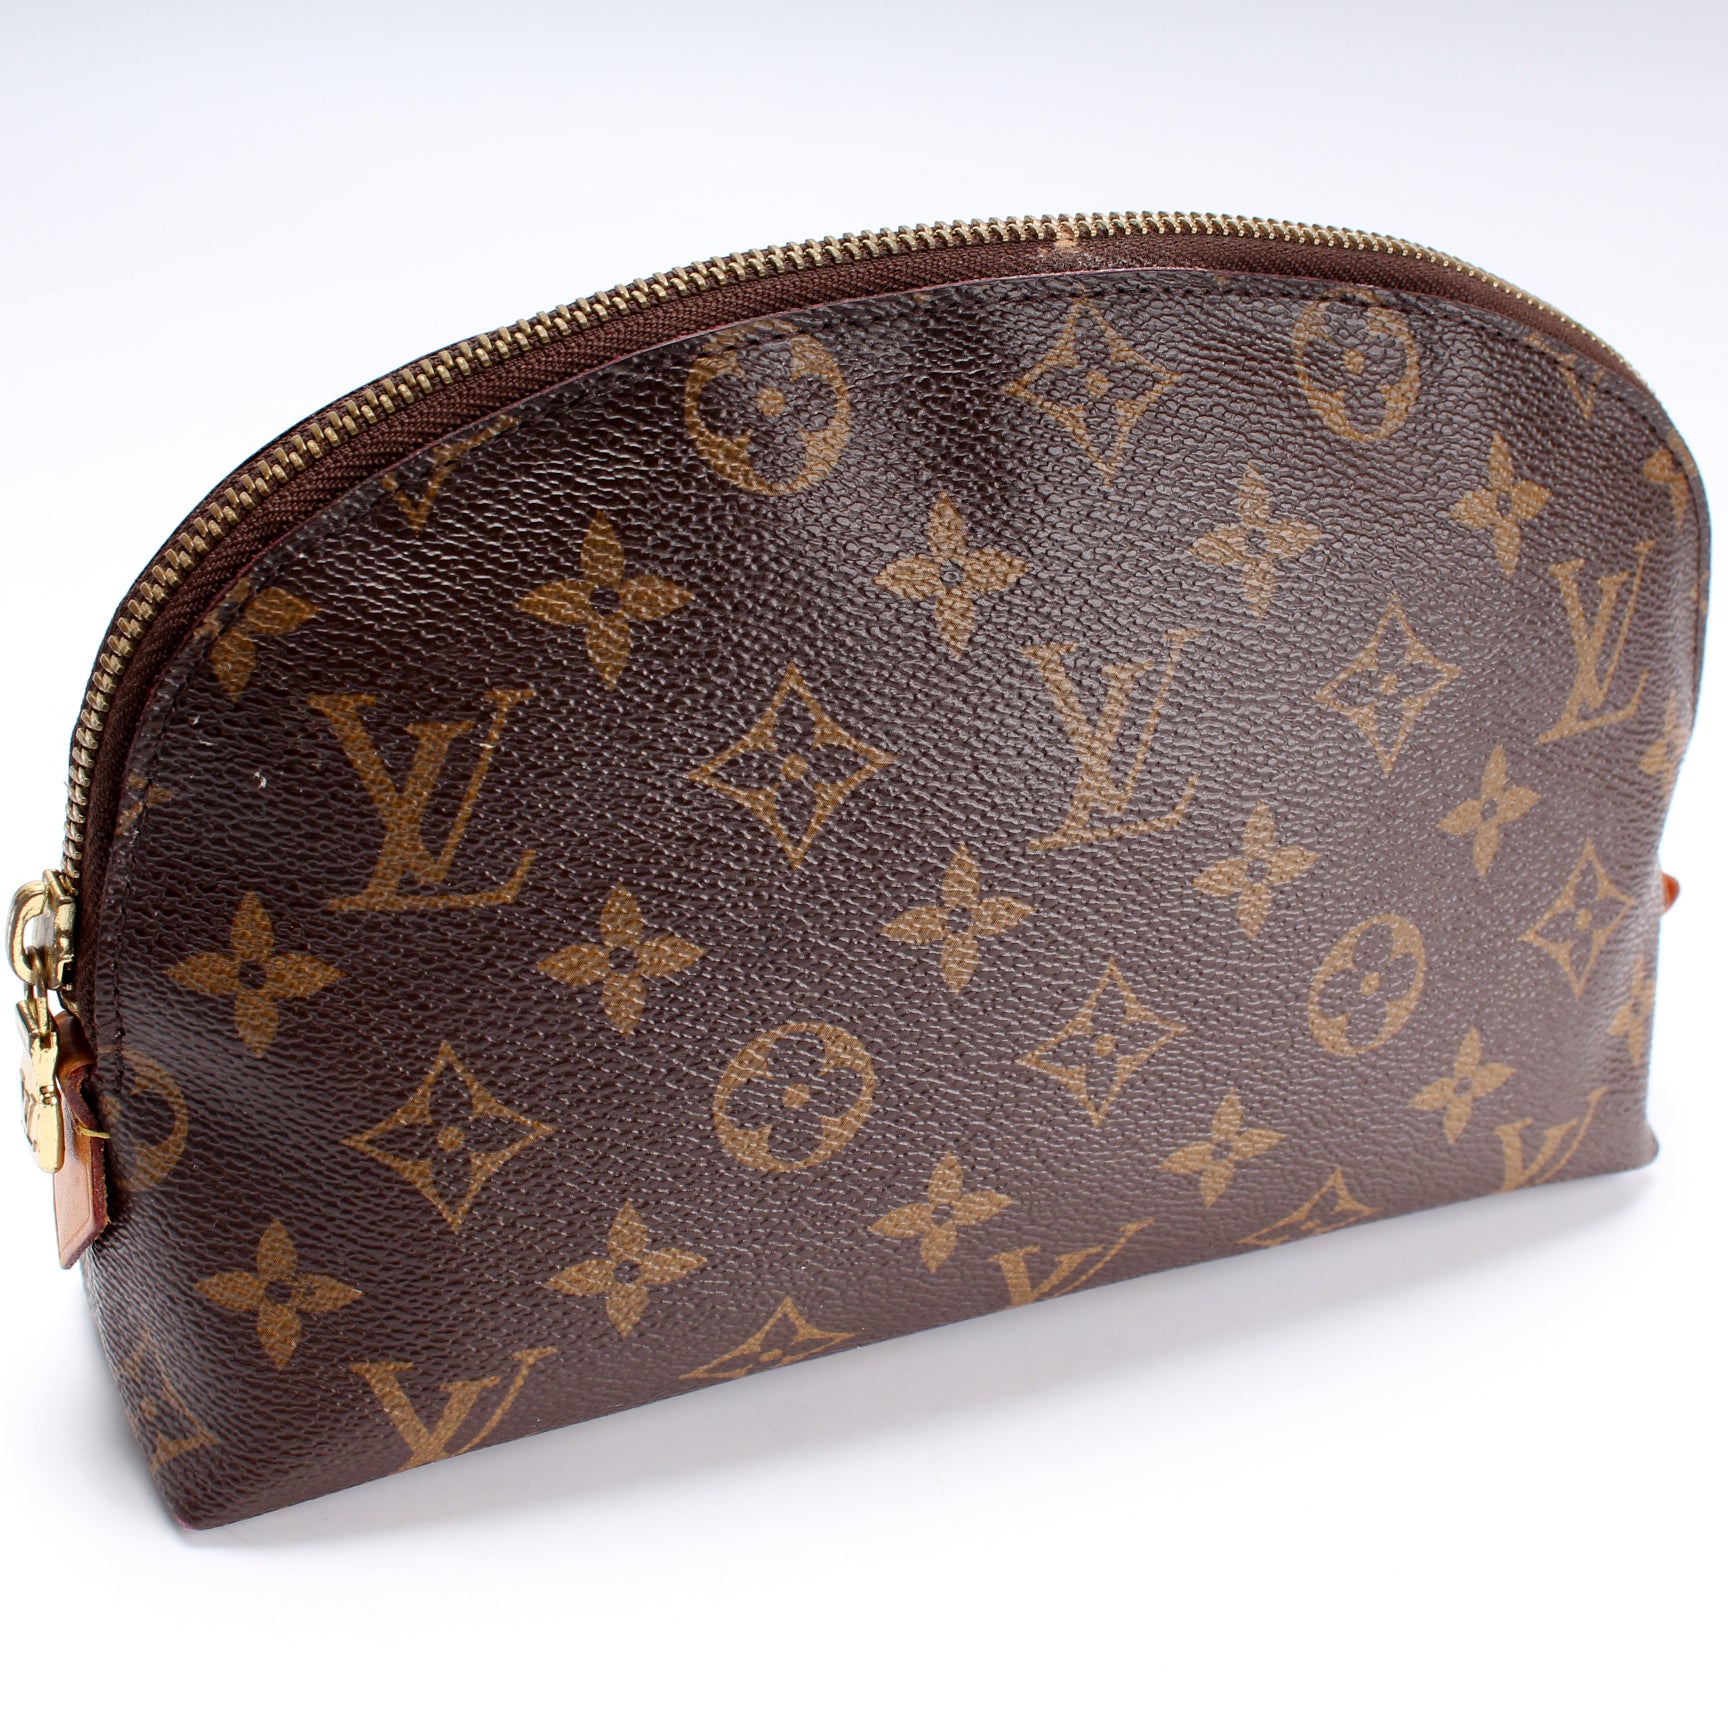 Louis Vuitton Cosmetic Pouch GM in Damier Ebene - SOLD